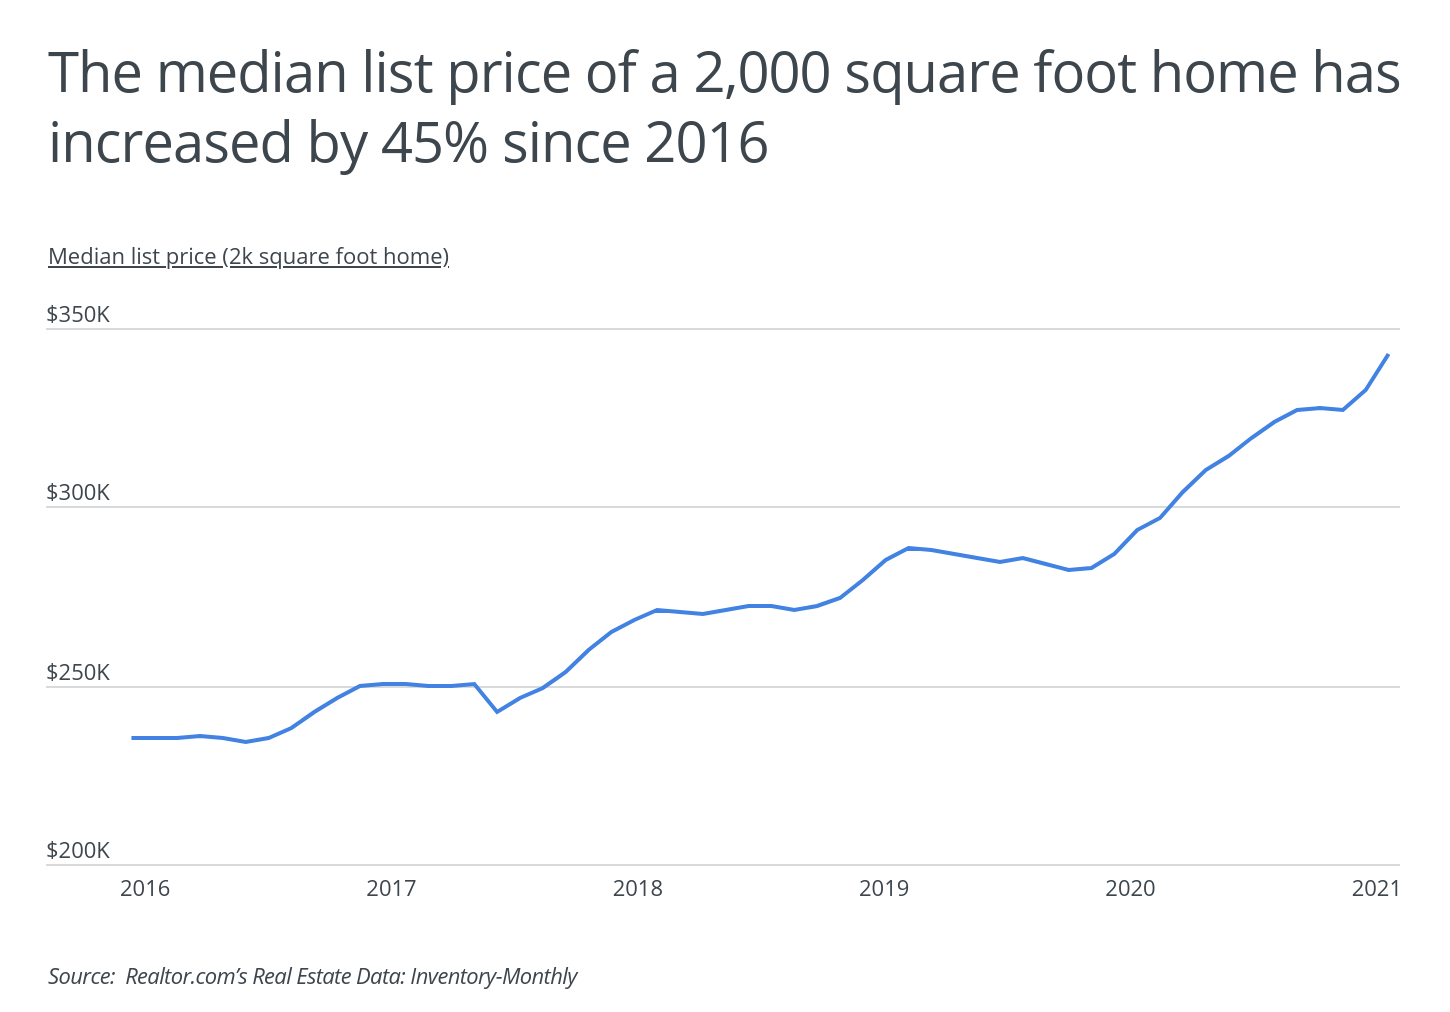 The median list price of a 2,000 square foot home has increased by 45% since 2016